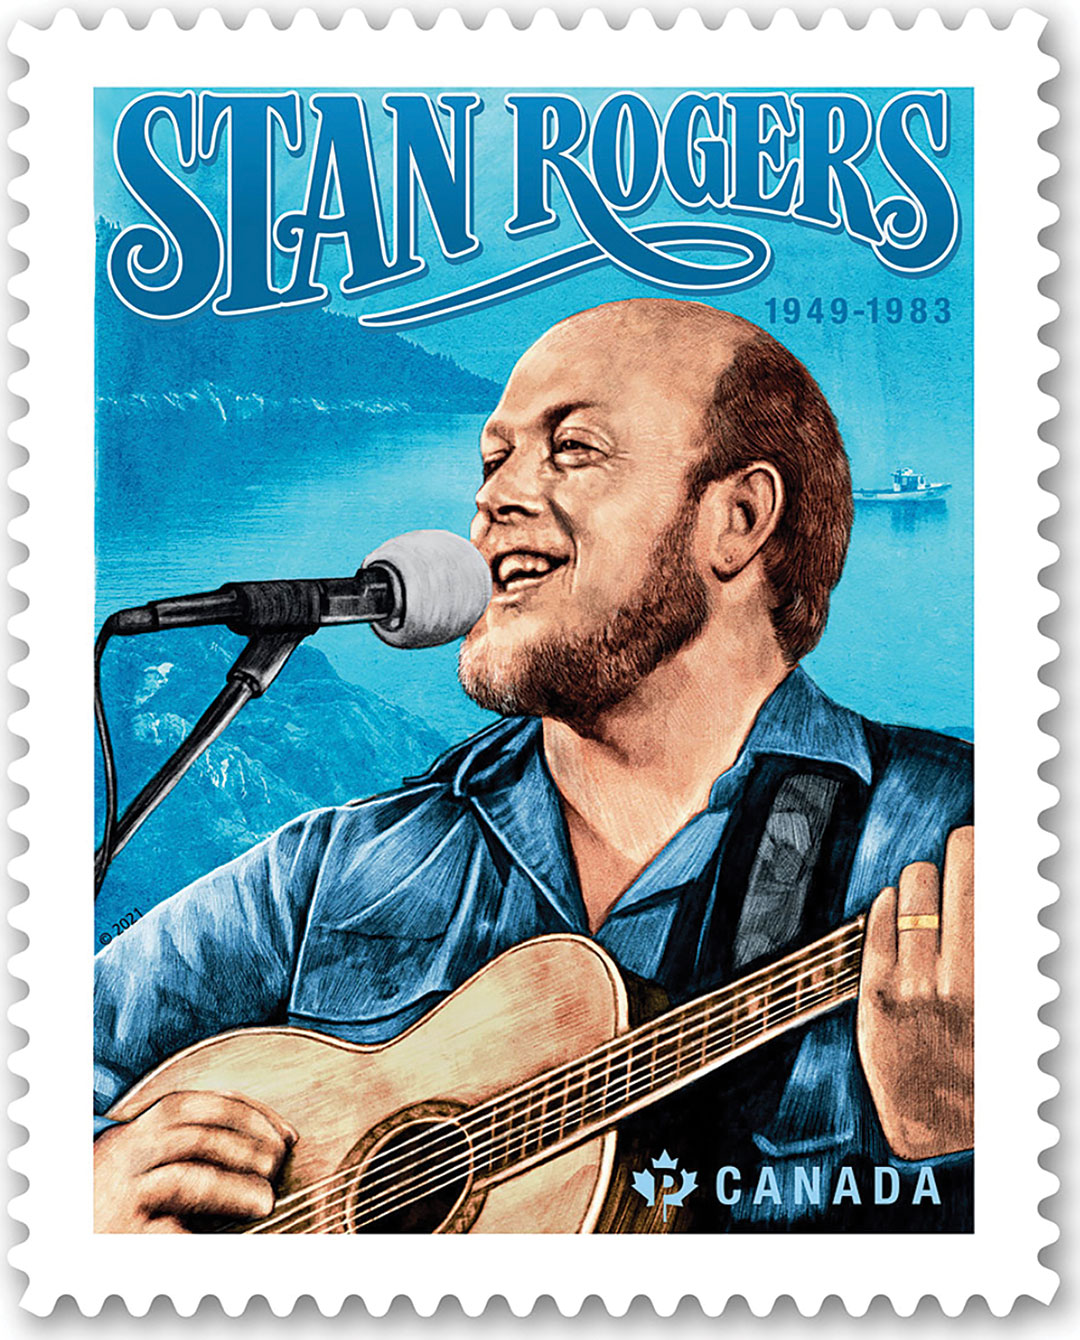 Stan Rogers’ sea shanties are much loved in his native Canada, which honored him with a postage stamp in 2021.